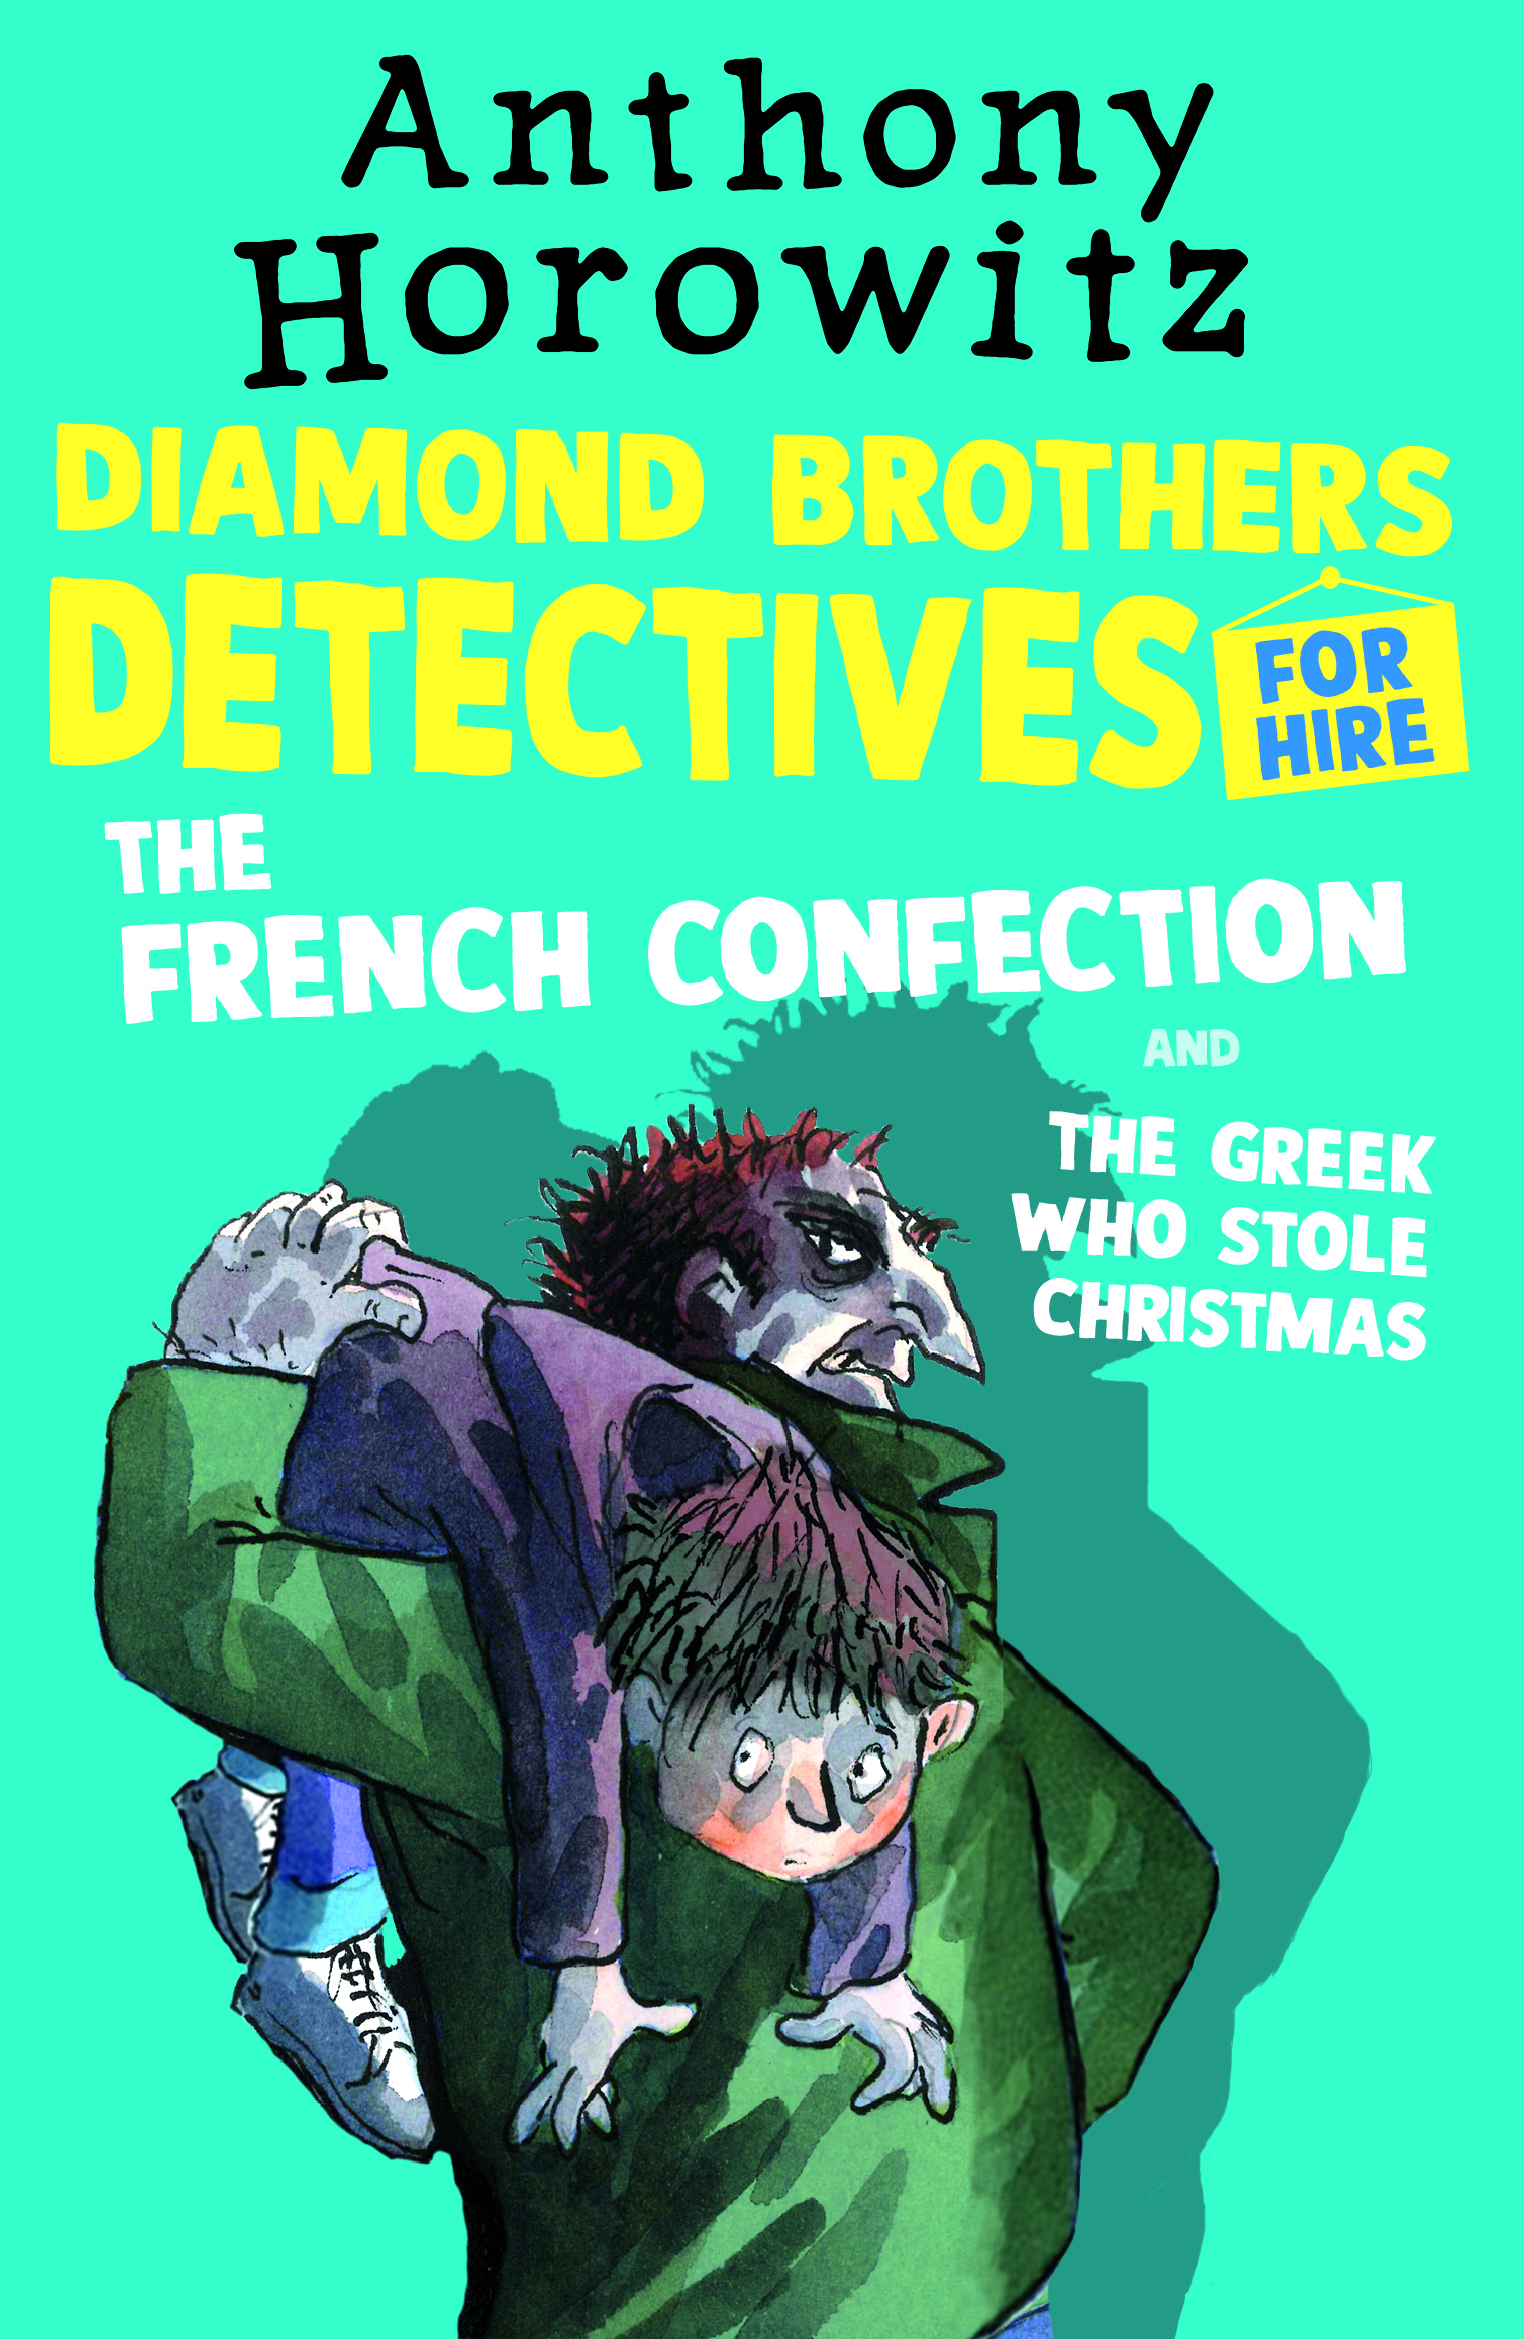 The-Diamond-Brothers-in-The-French-Confection-The-Greek-Who-Stole-Christmas